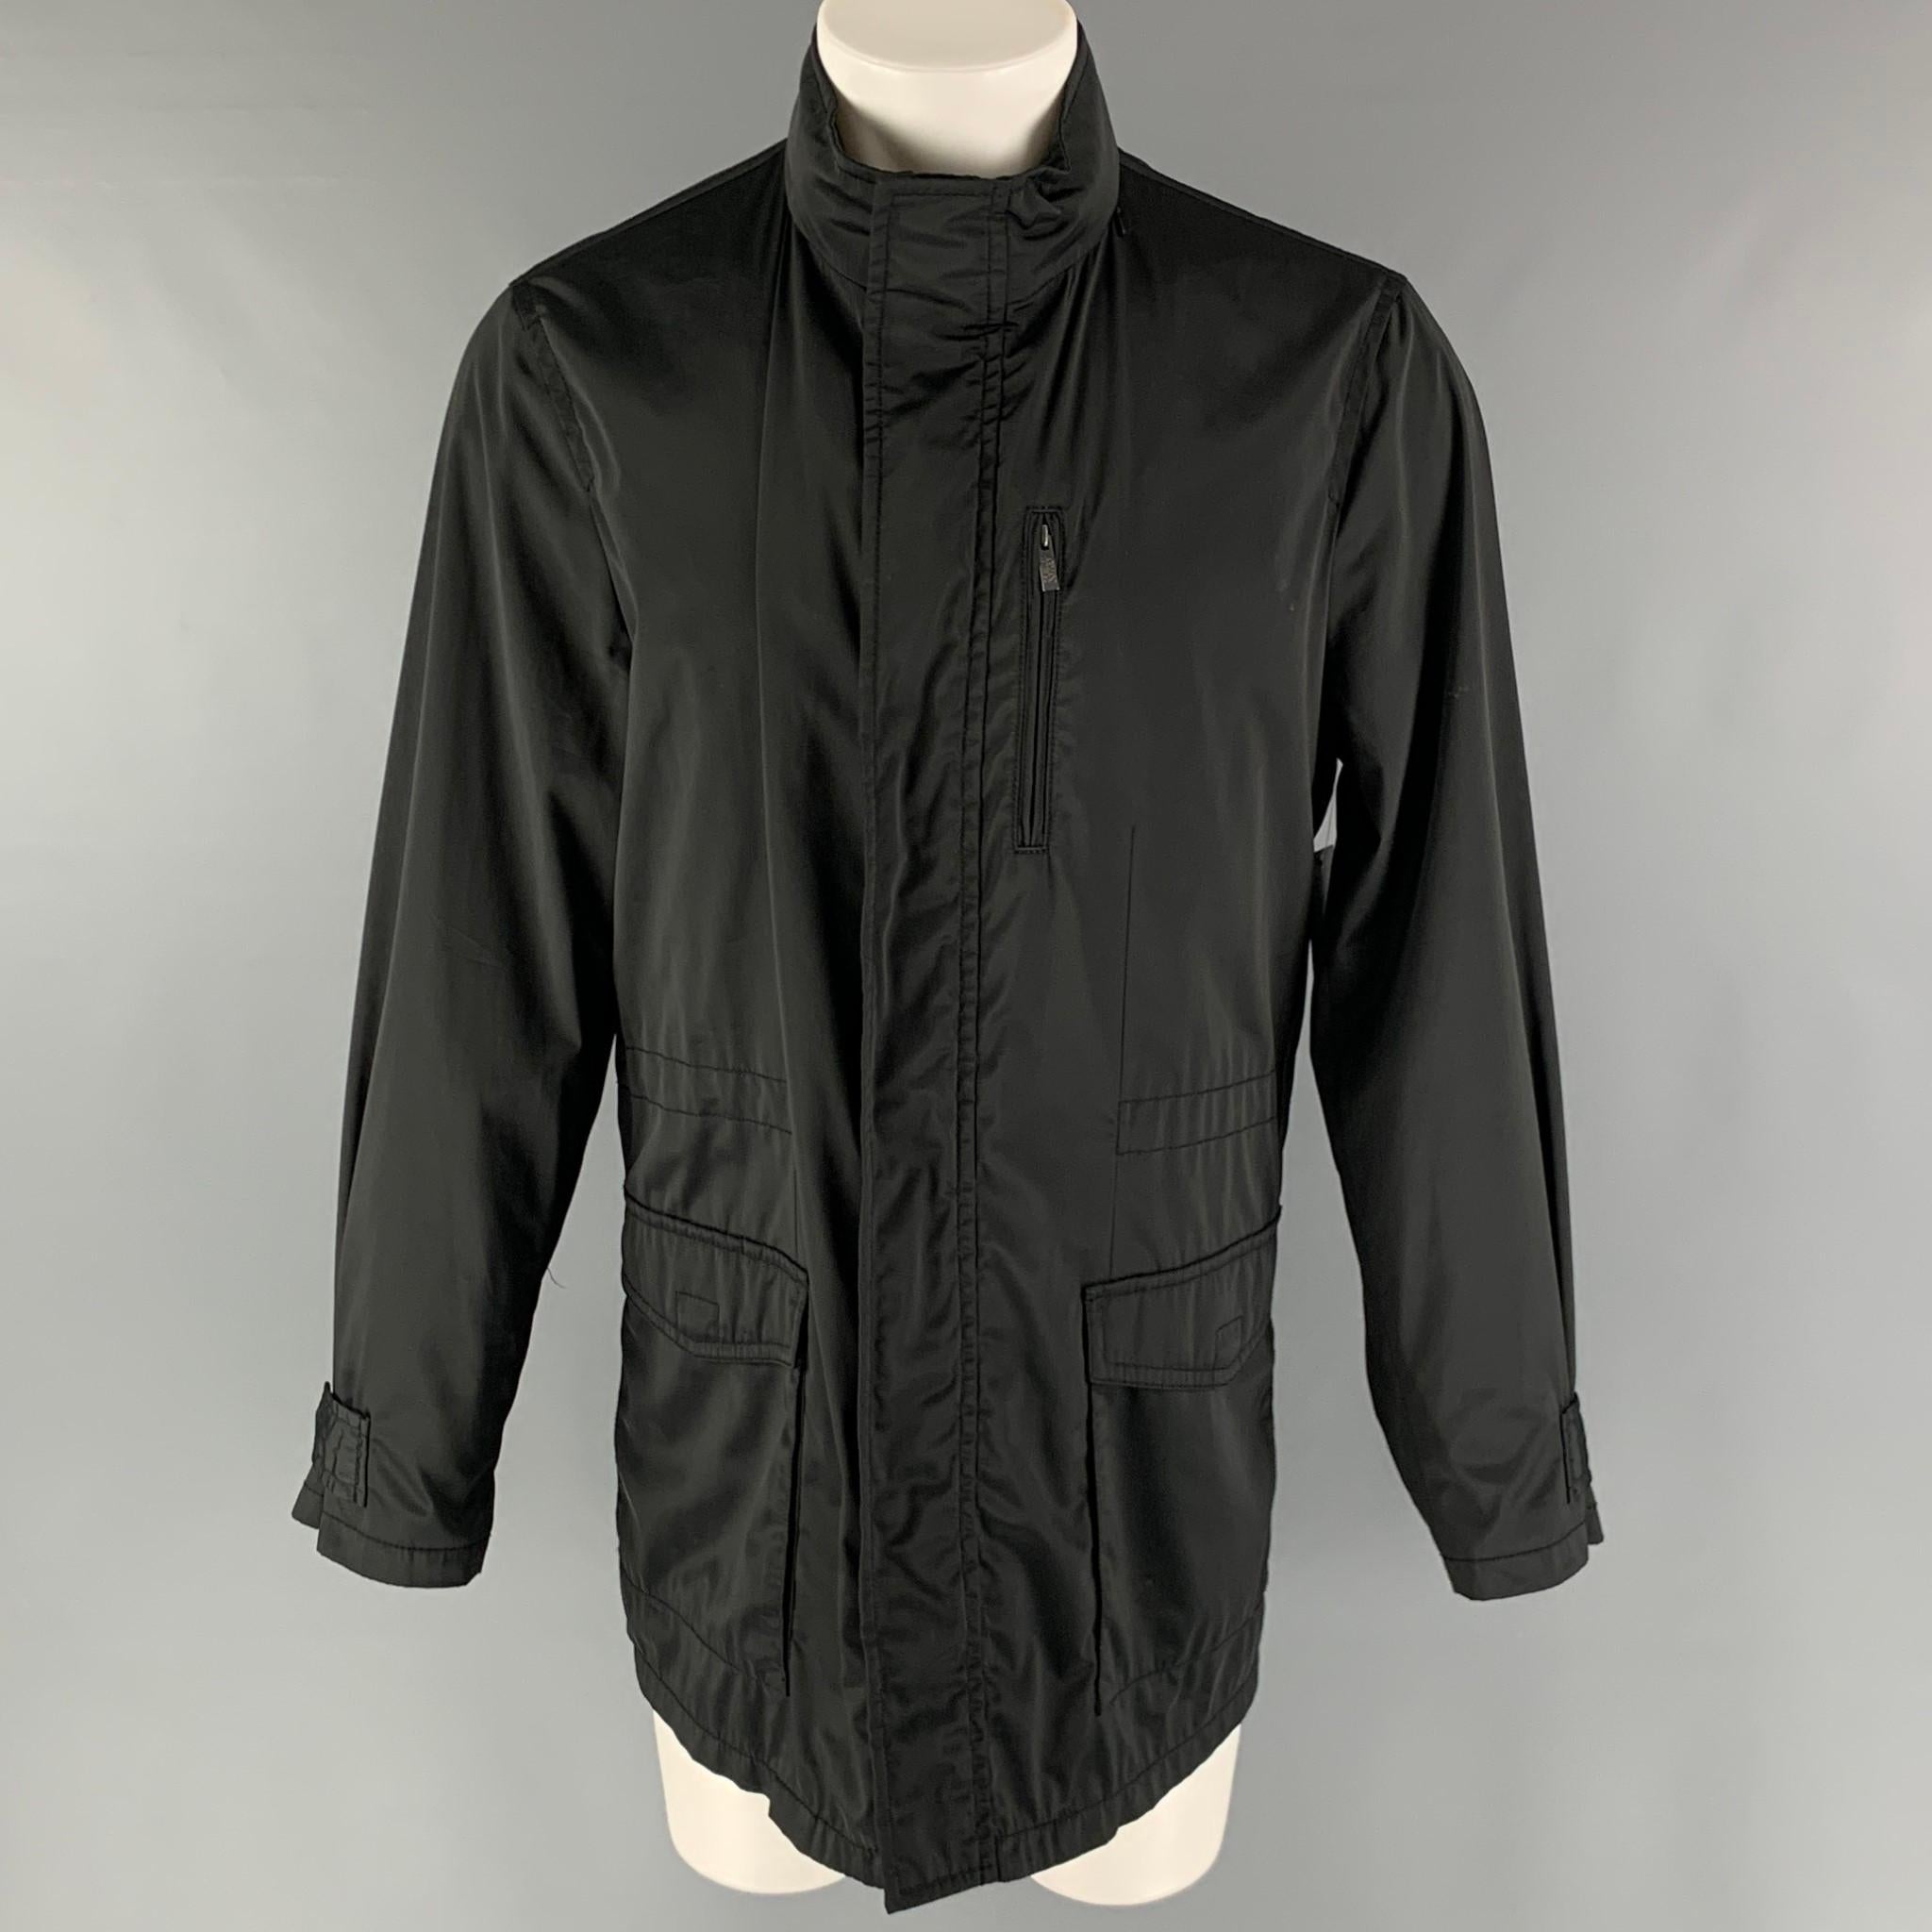 ARMANI COLLEZIONI windbreaker jacket comes in a black polyester water repellent woven material featuring a park style, patch pockets, internal hood, and a zip up and snap button closure.

Excellent Pre-Owned Condition.
Marked: